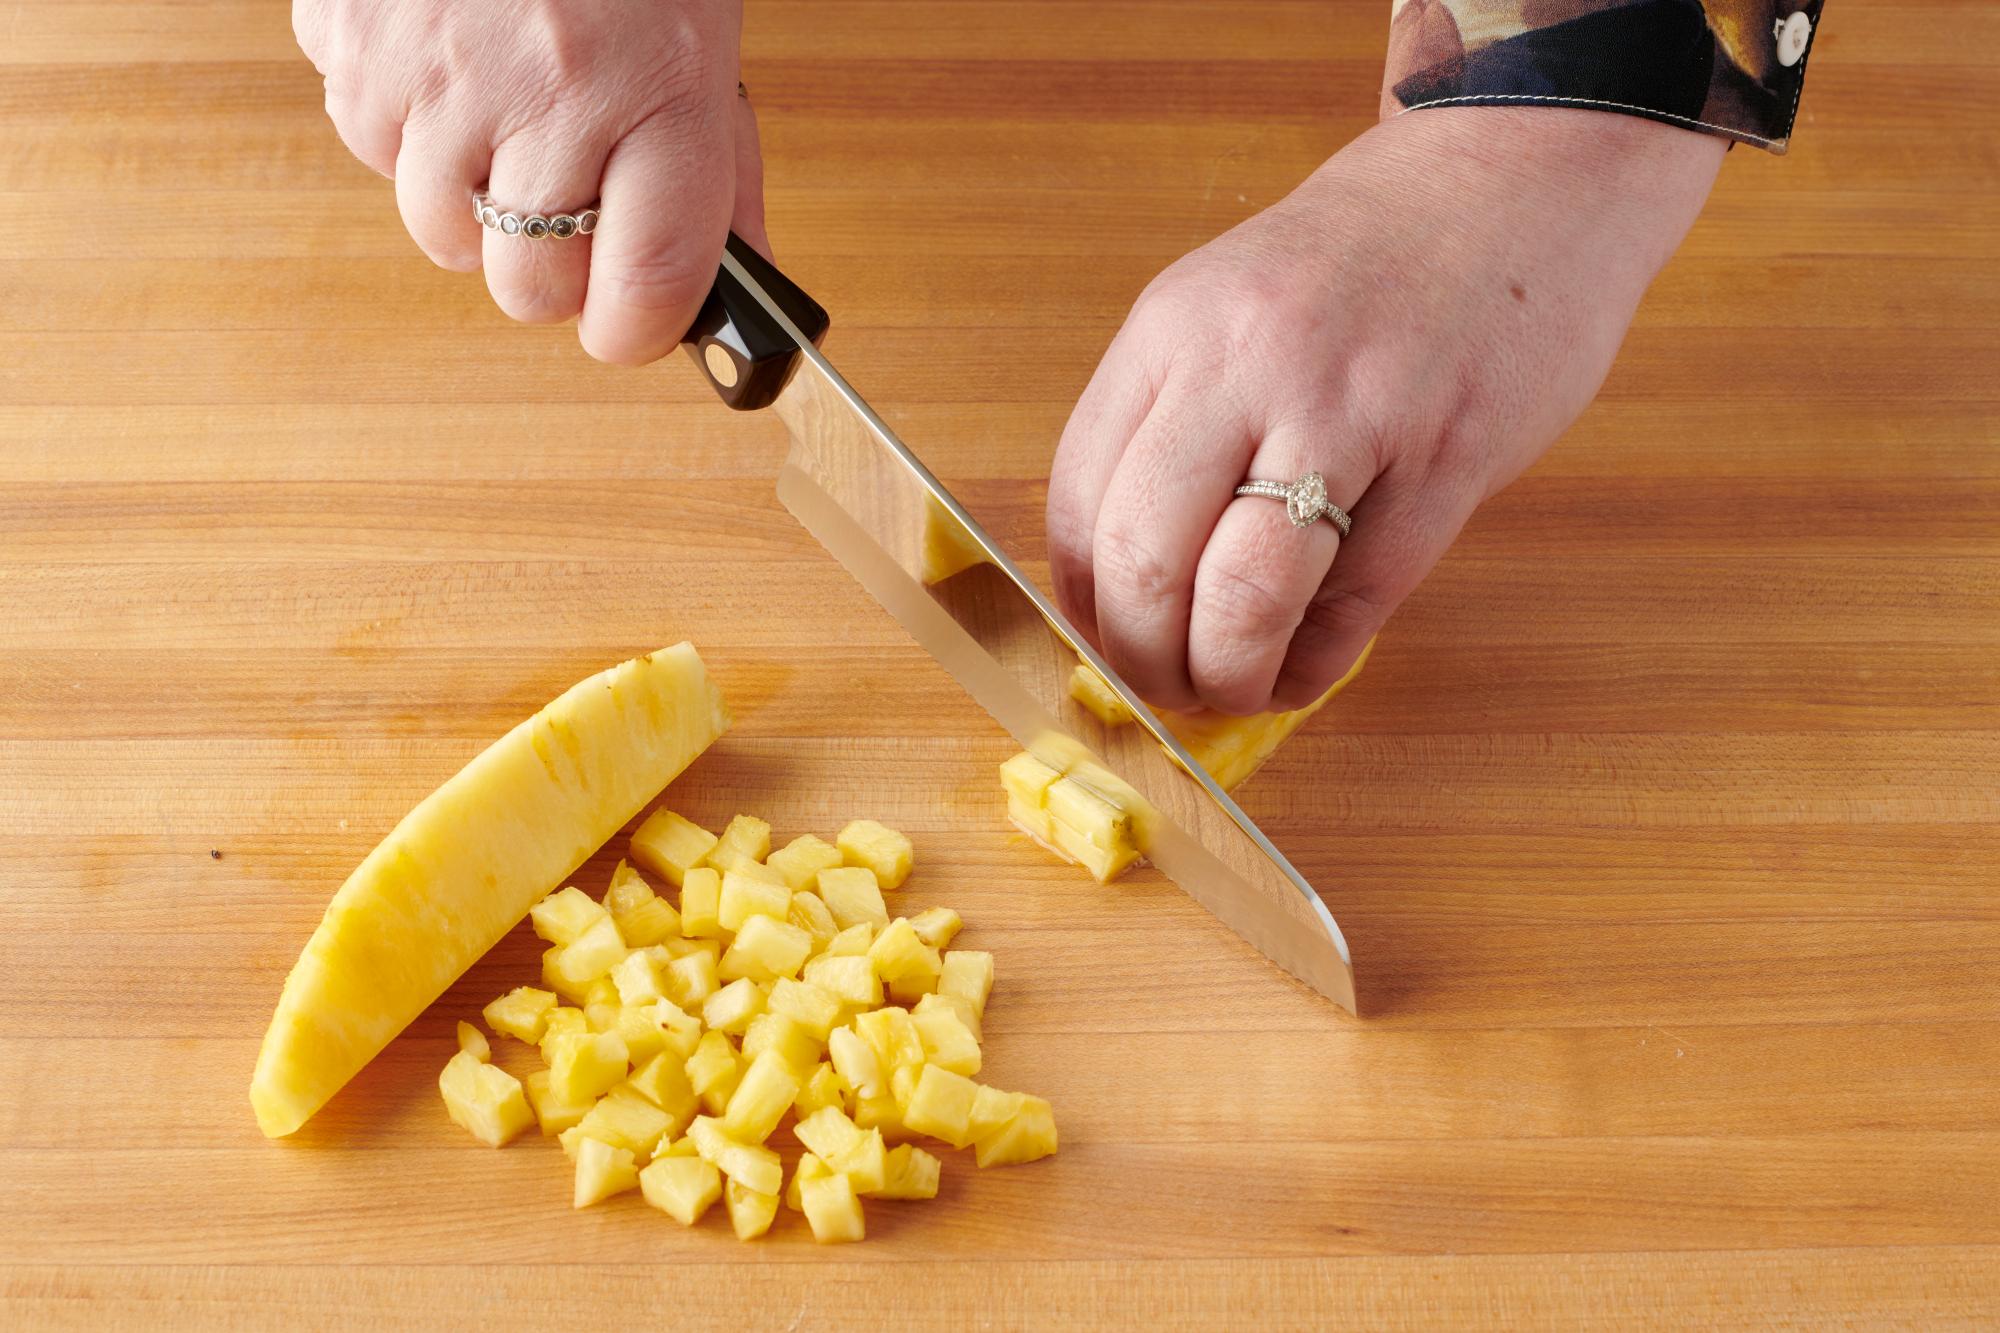 Dicing Pineapple with a Hardy Slicer